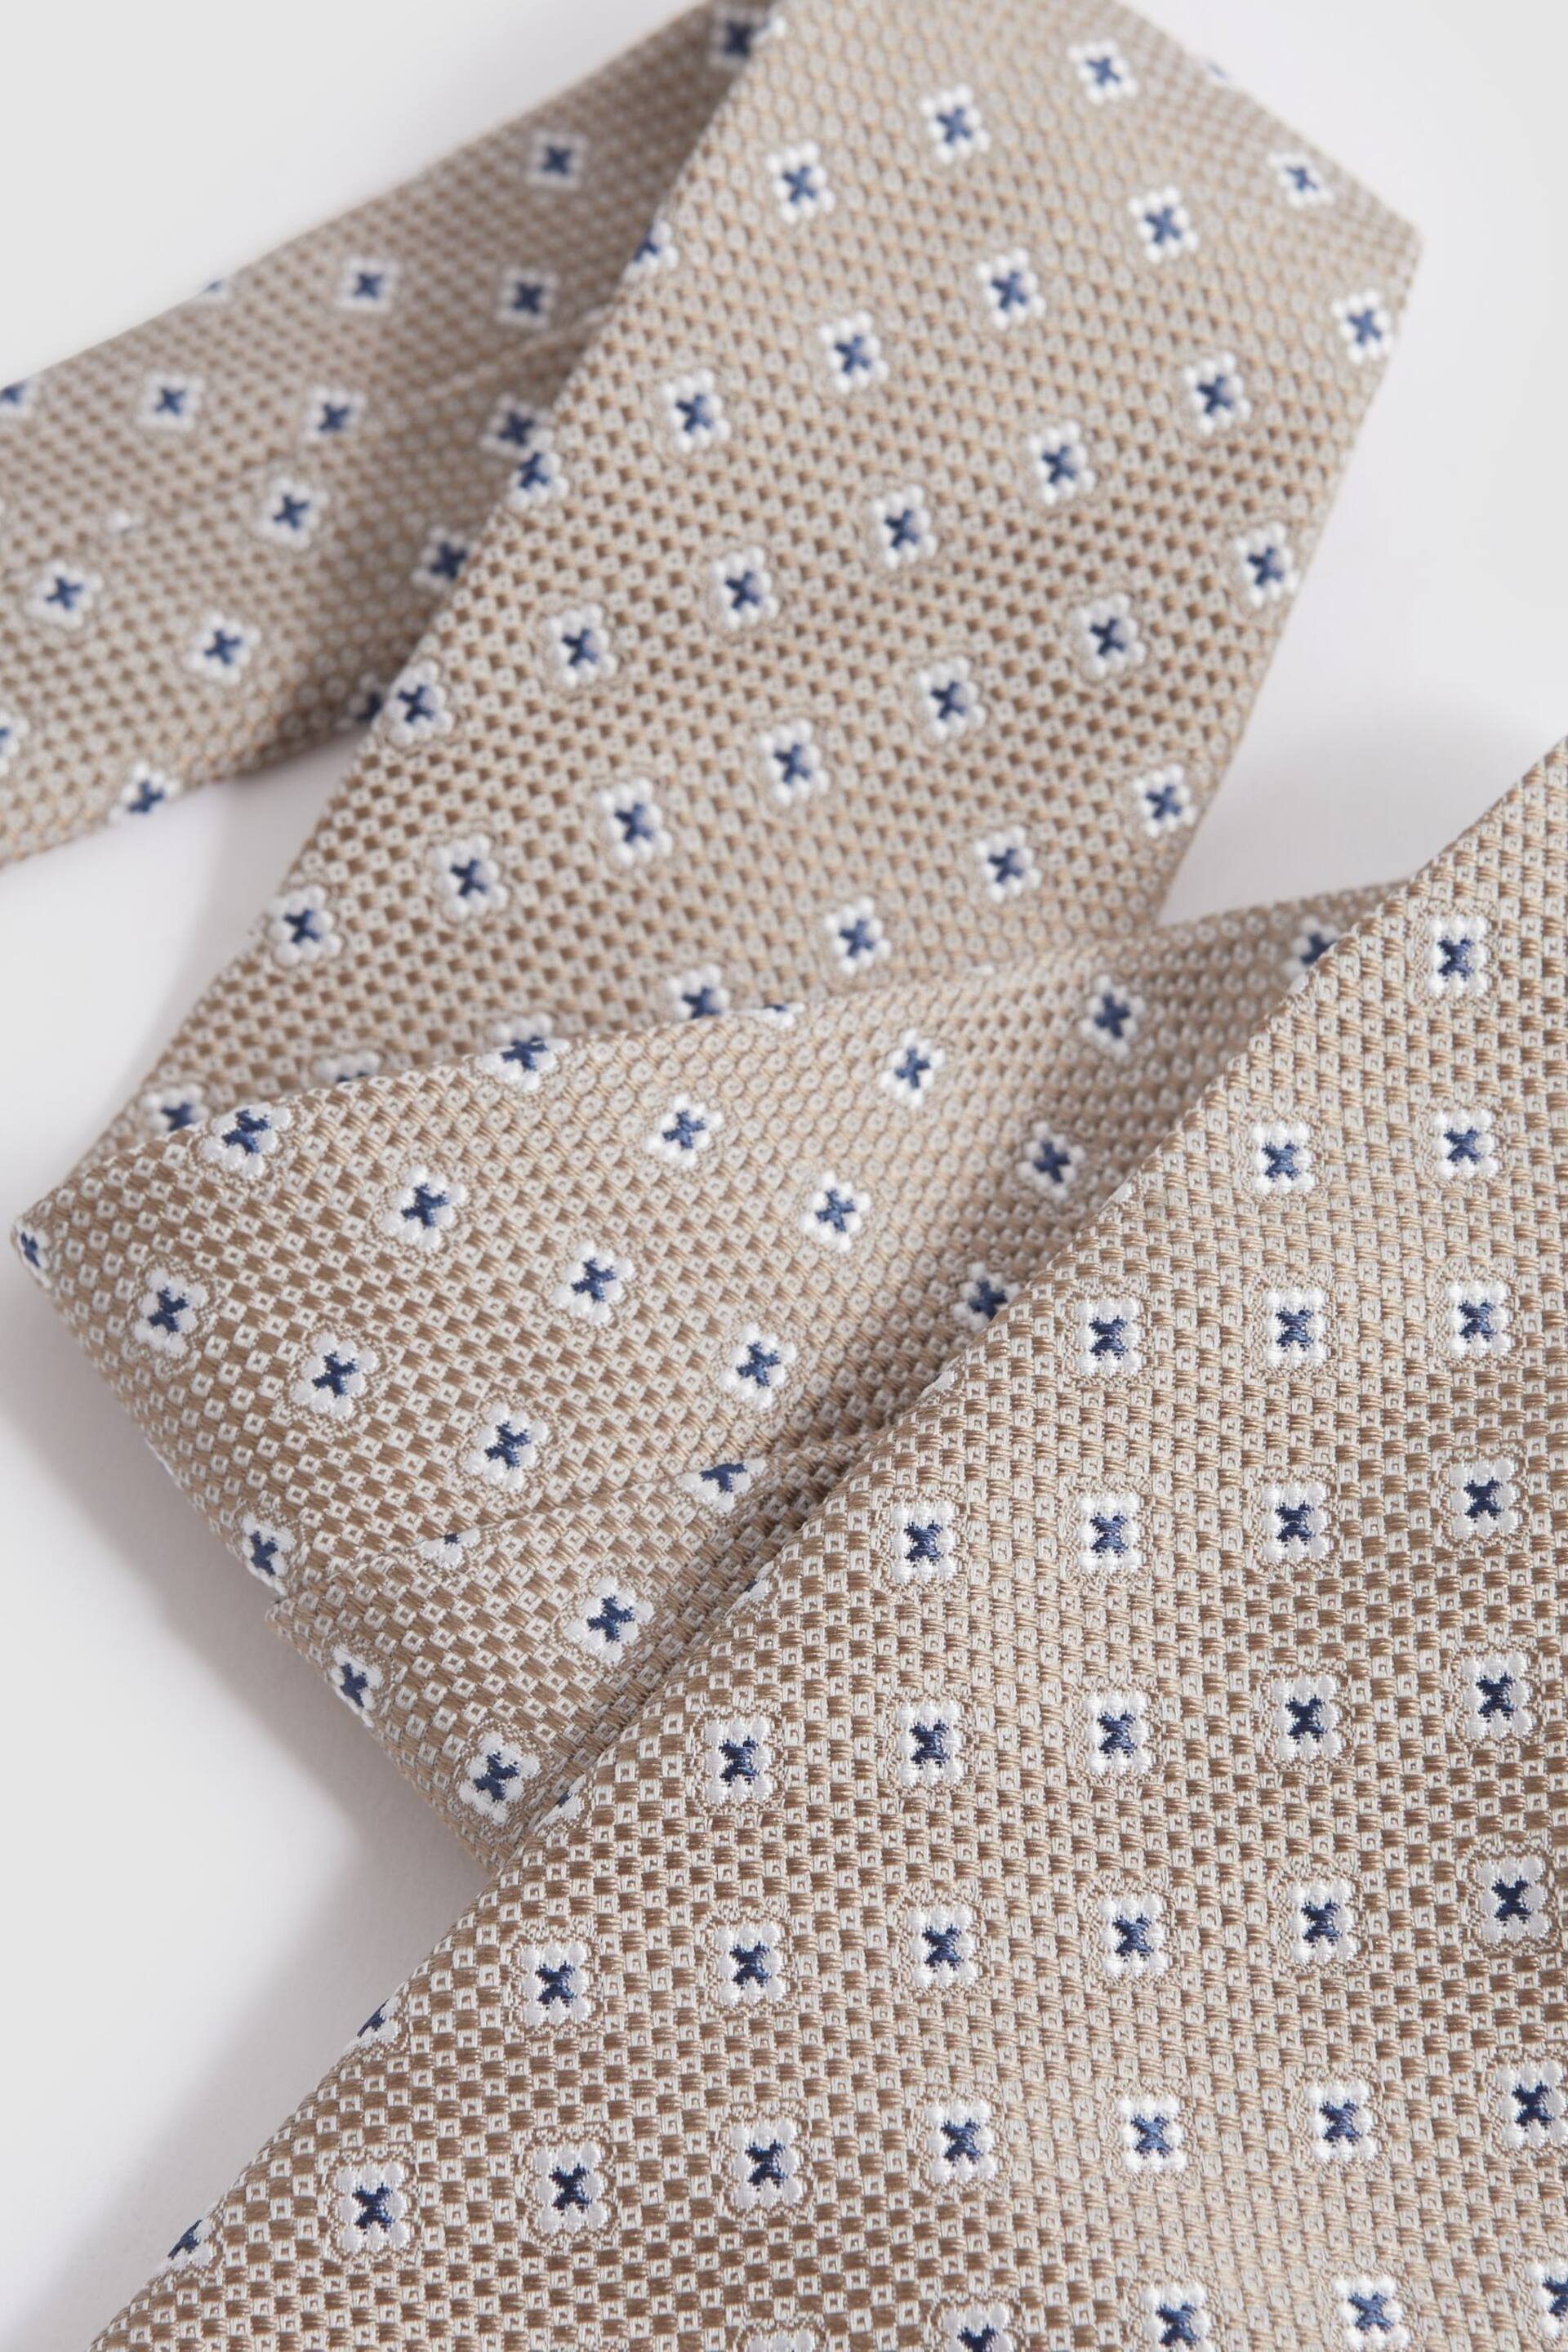 Reiss Oatmeal Apollinare Silk Blend Floral Print Tie - Image 3 of 5